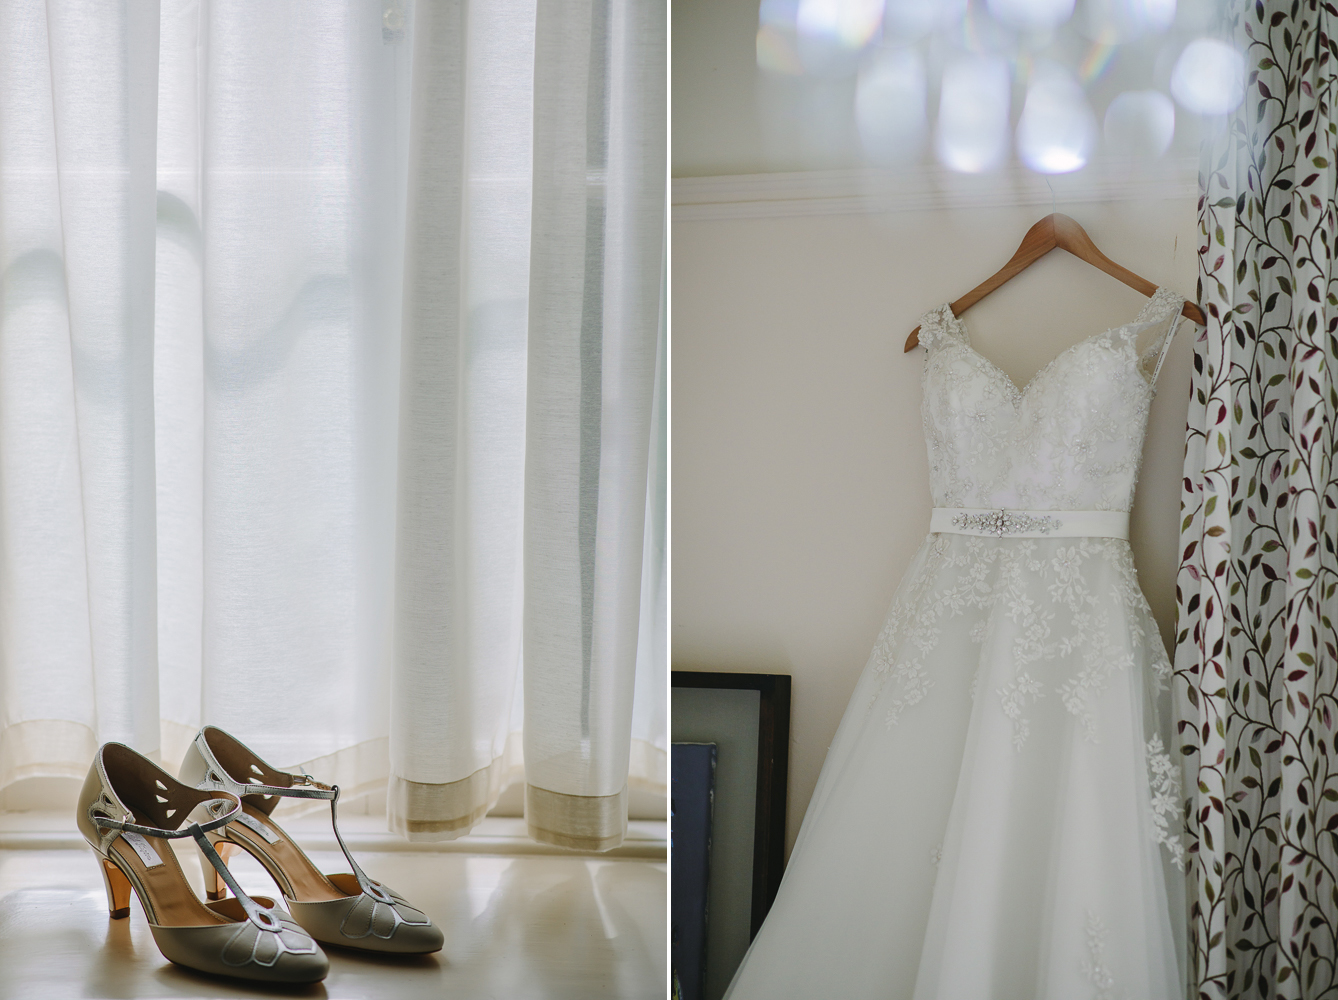 Brides dress hanging up. Wedding bridal shows placed on a window sill.